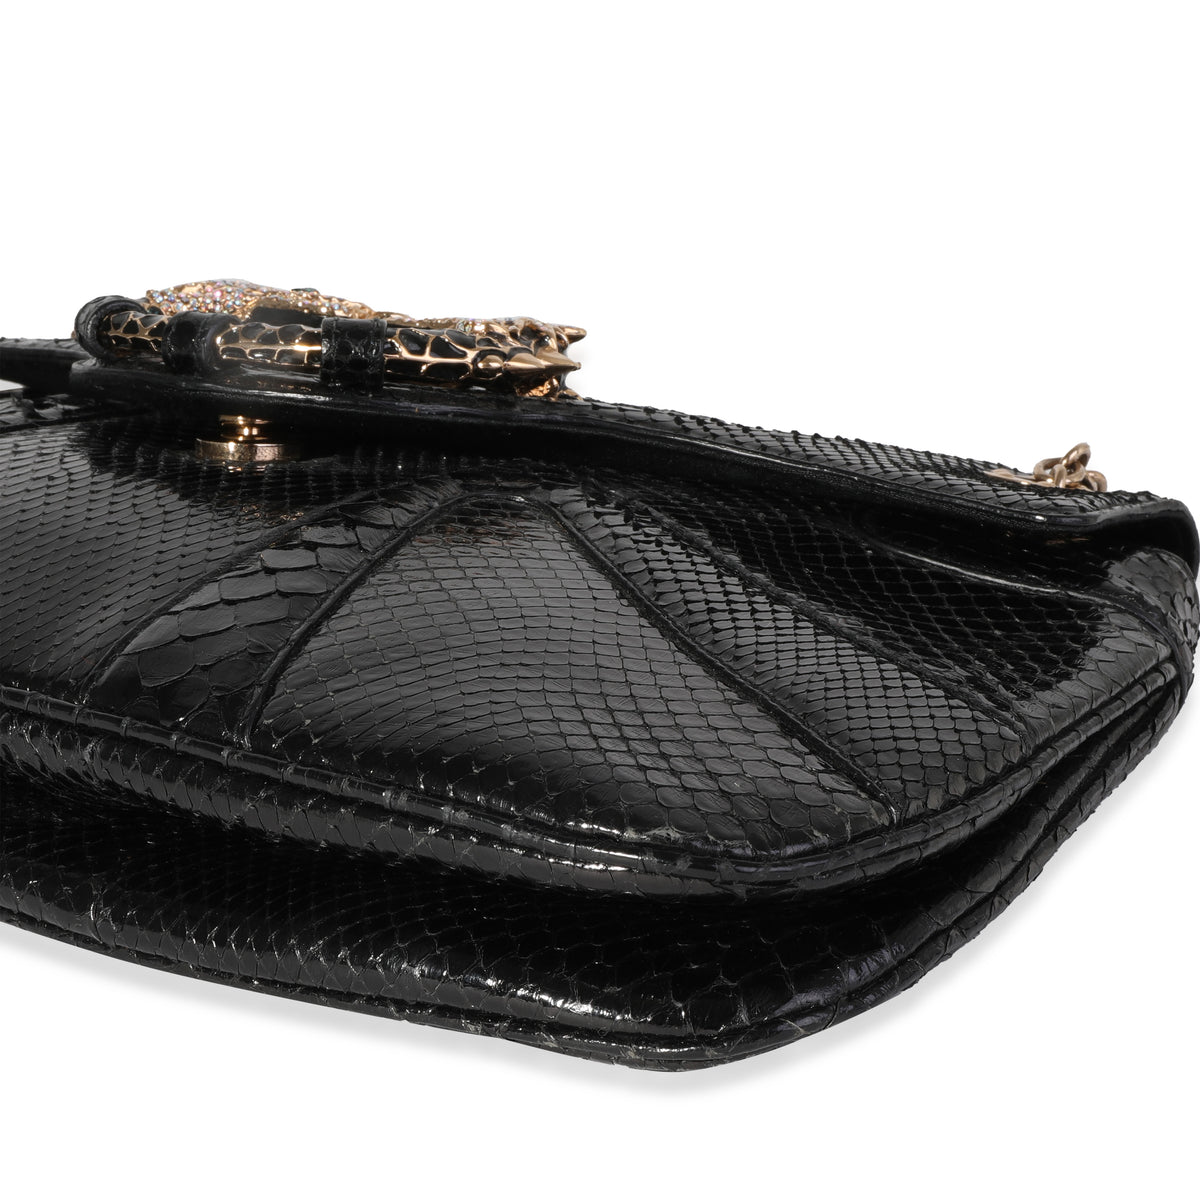 Gucci by Tom Ford Vintage Jeweled Mini Clutch Evening Bag